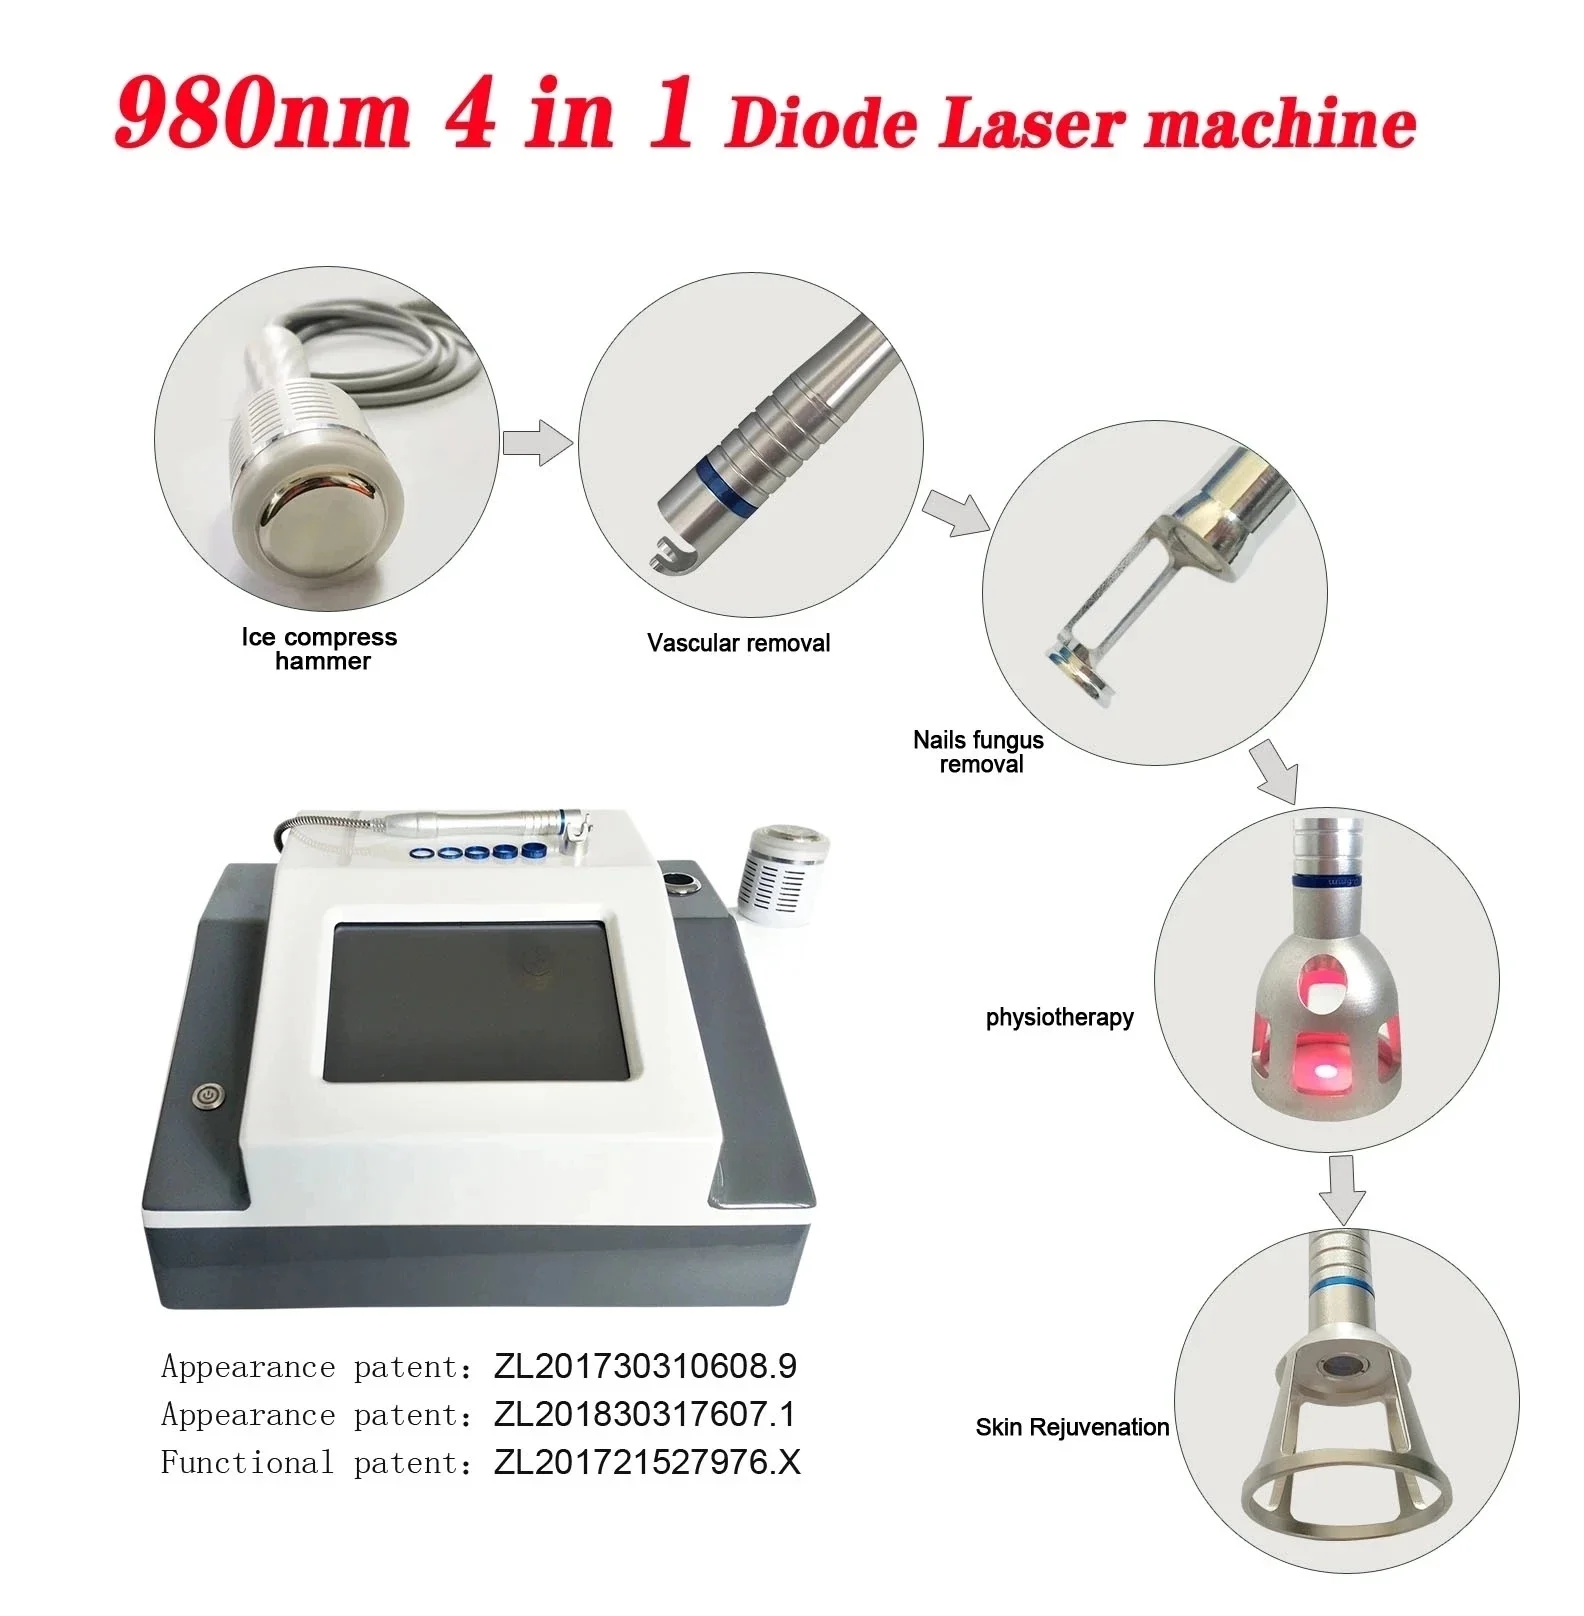 4 in 1 980 nm Diode Laser Machine For Skin Fungal Infection Images Vascular Veins Removal Laser Physical Therapy Device